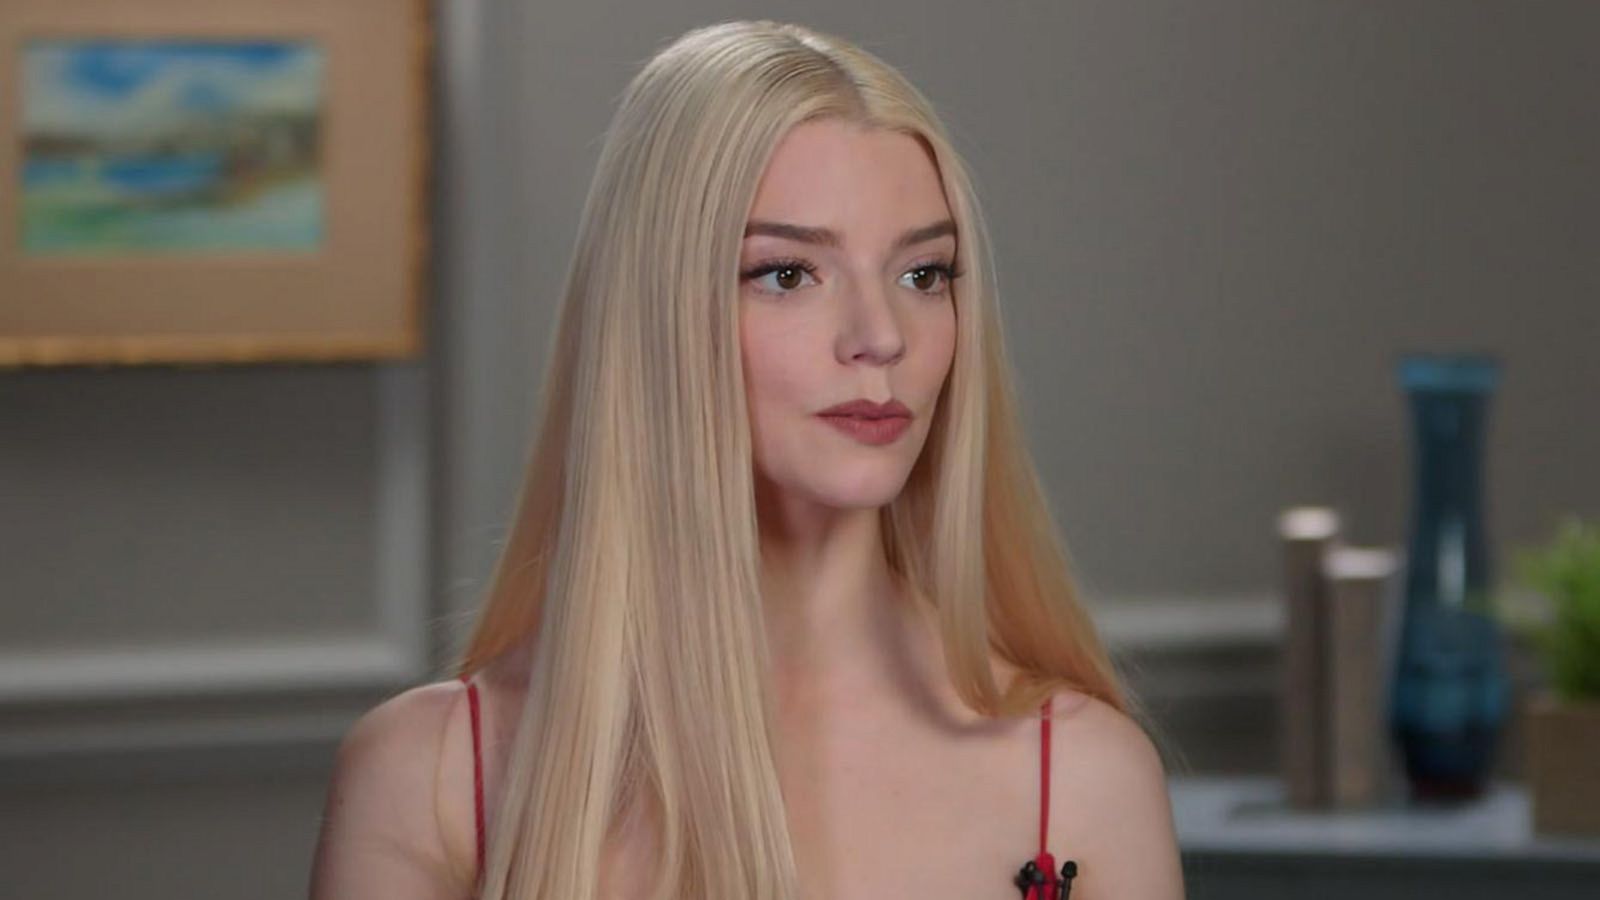 Anya Taylor-Joy Brought Glowing Beauty—And the Perfect Red